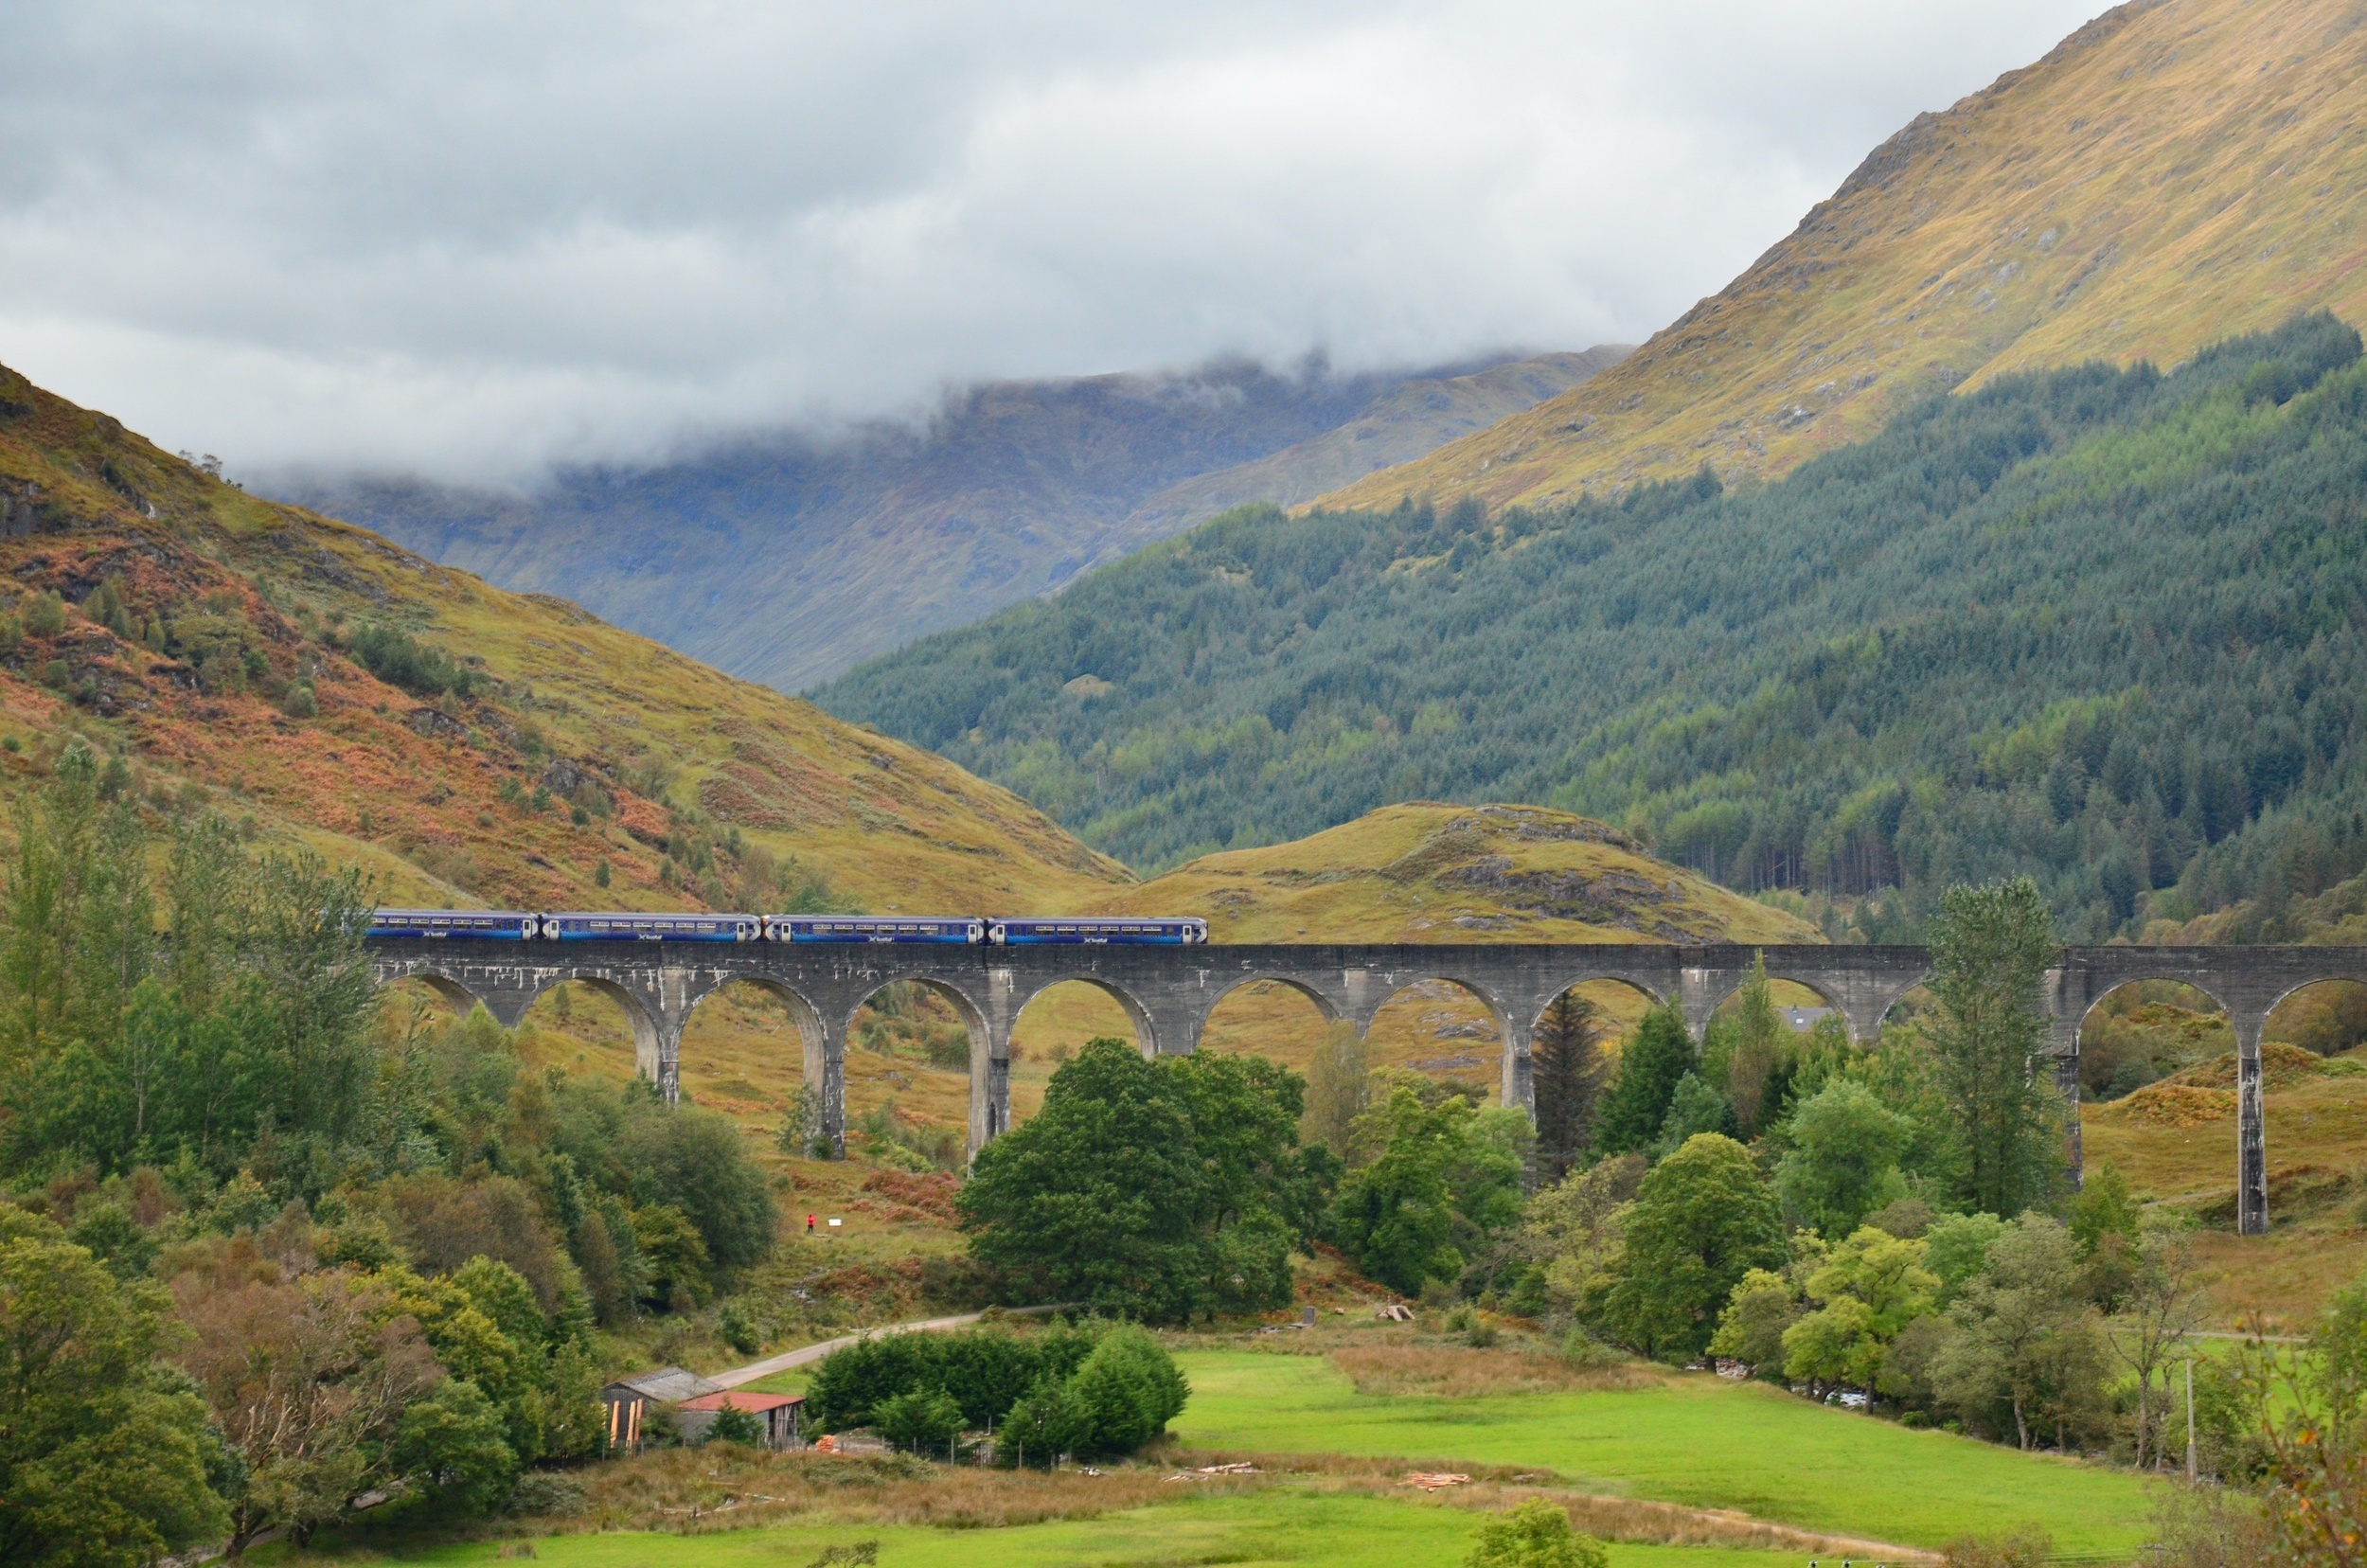 <p>The West Highland Line is the most picturesque in all of the United Kingdom. You’ll follow the Clyde River into the country and through <span>Trossachs National Park and Rannoch Moor. The five-and-a-half-hour journey is perfect for those looking to see a bit of Scotland in a short amount of time.</span></p><p><a href='https://www.msn.com/en-us/community/channel/vid-cj9pqbr0vn9in2b6ddcd8sfgpfq6x6utp44fssrv6mc2gtybw0us'>Follow us on MSN to see more of our exclusive lifestyle content.</a></p>